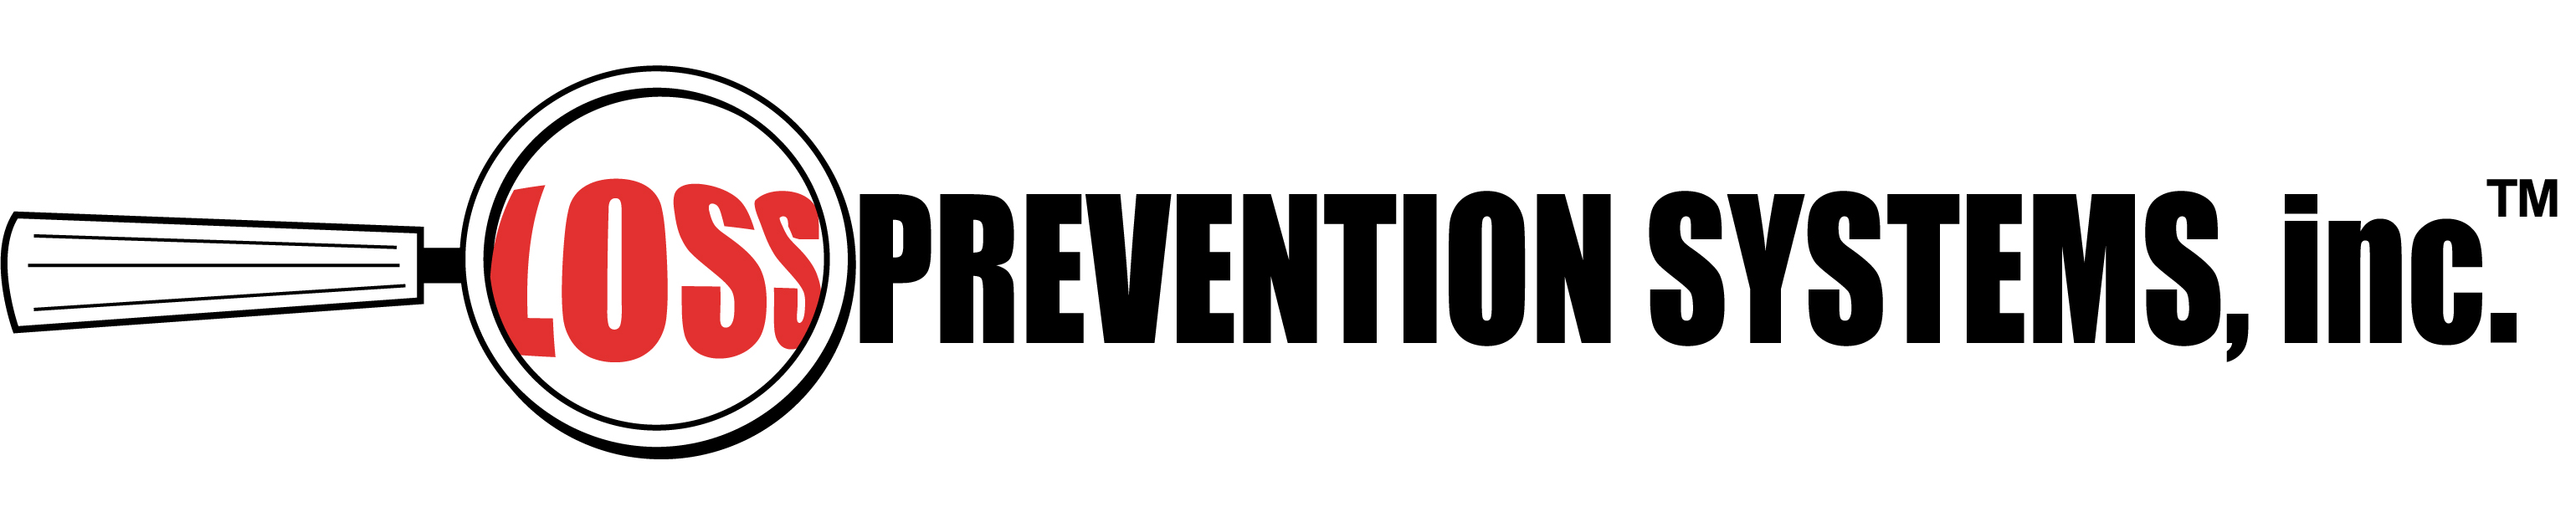 Loss Prevention Systems